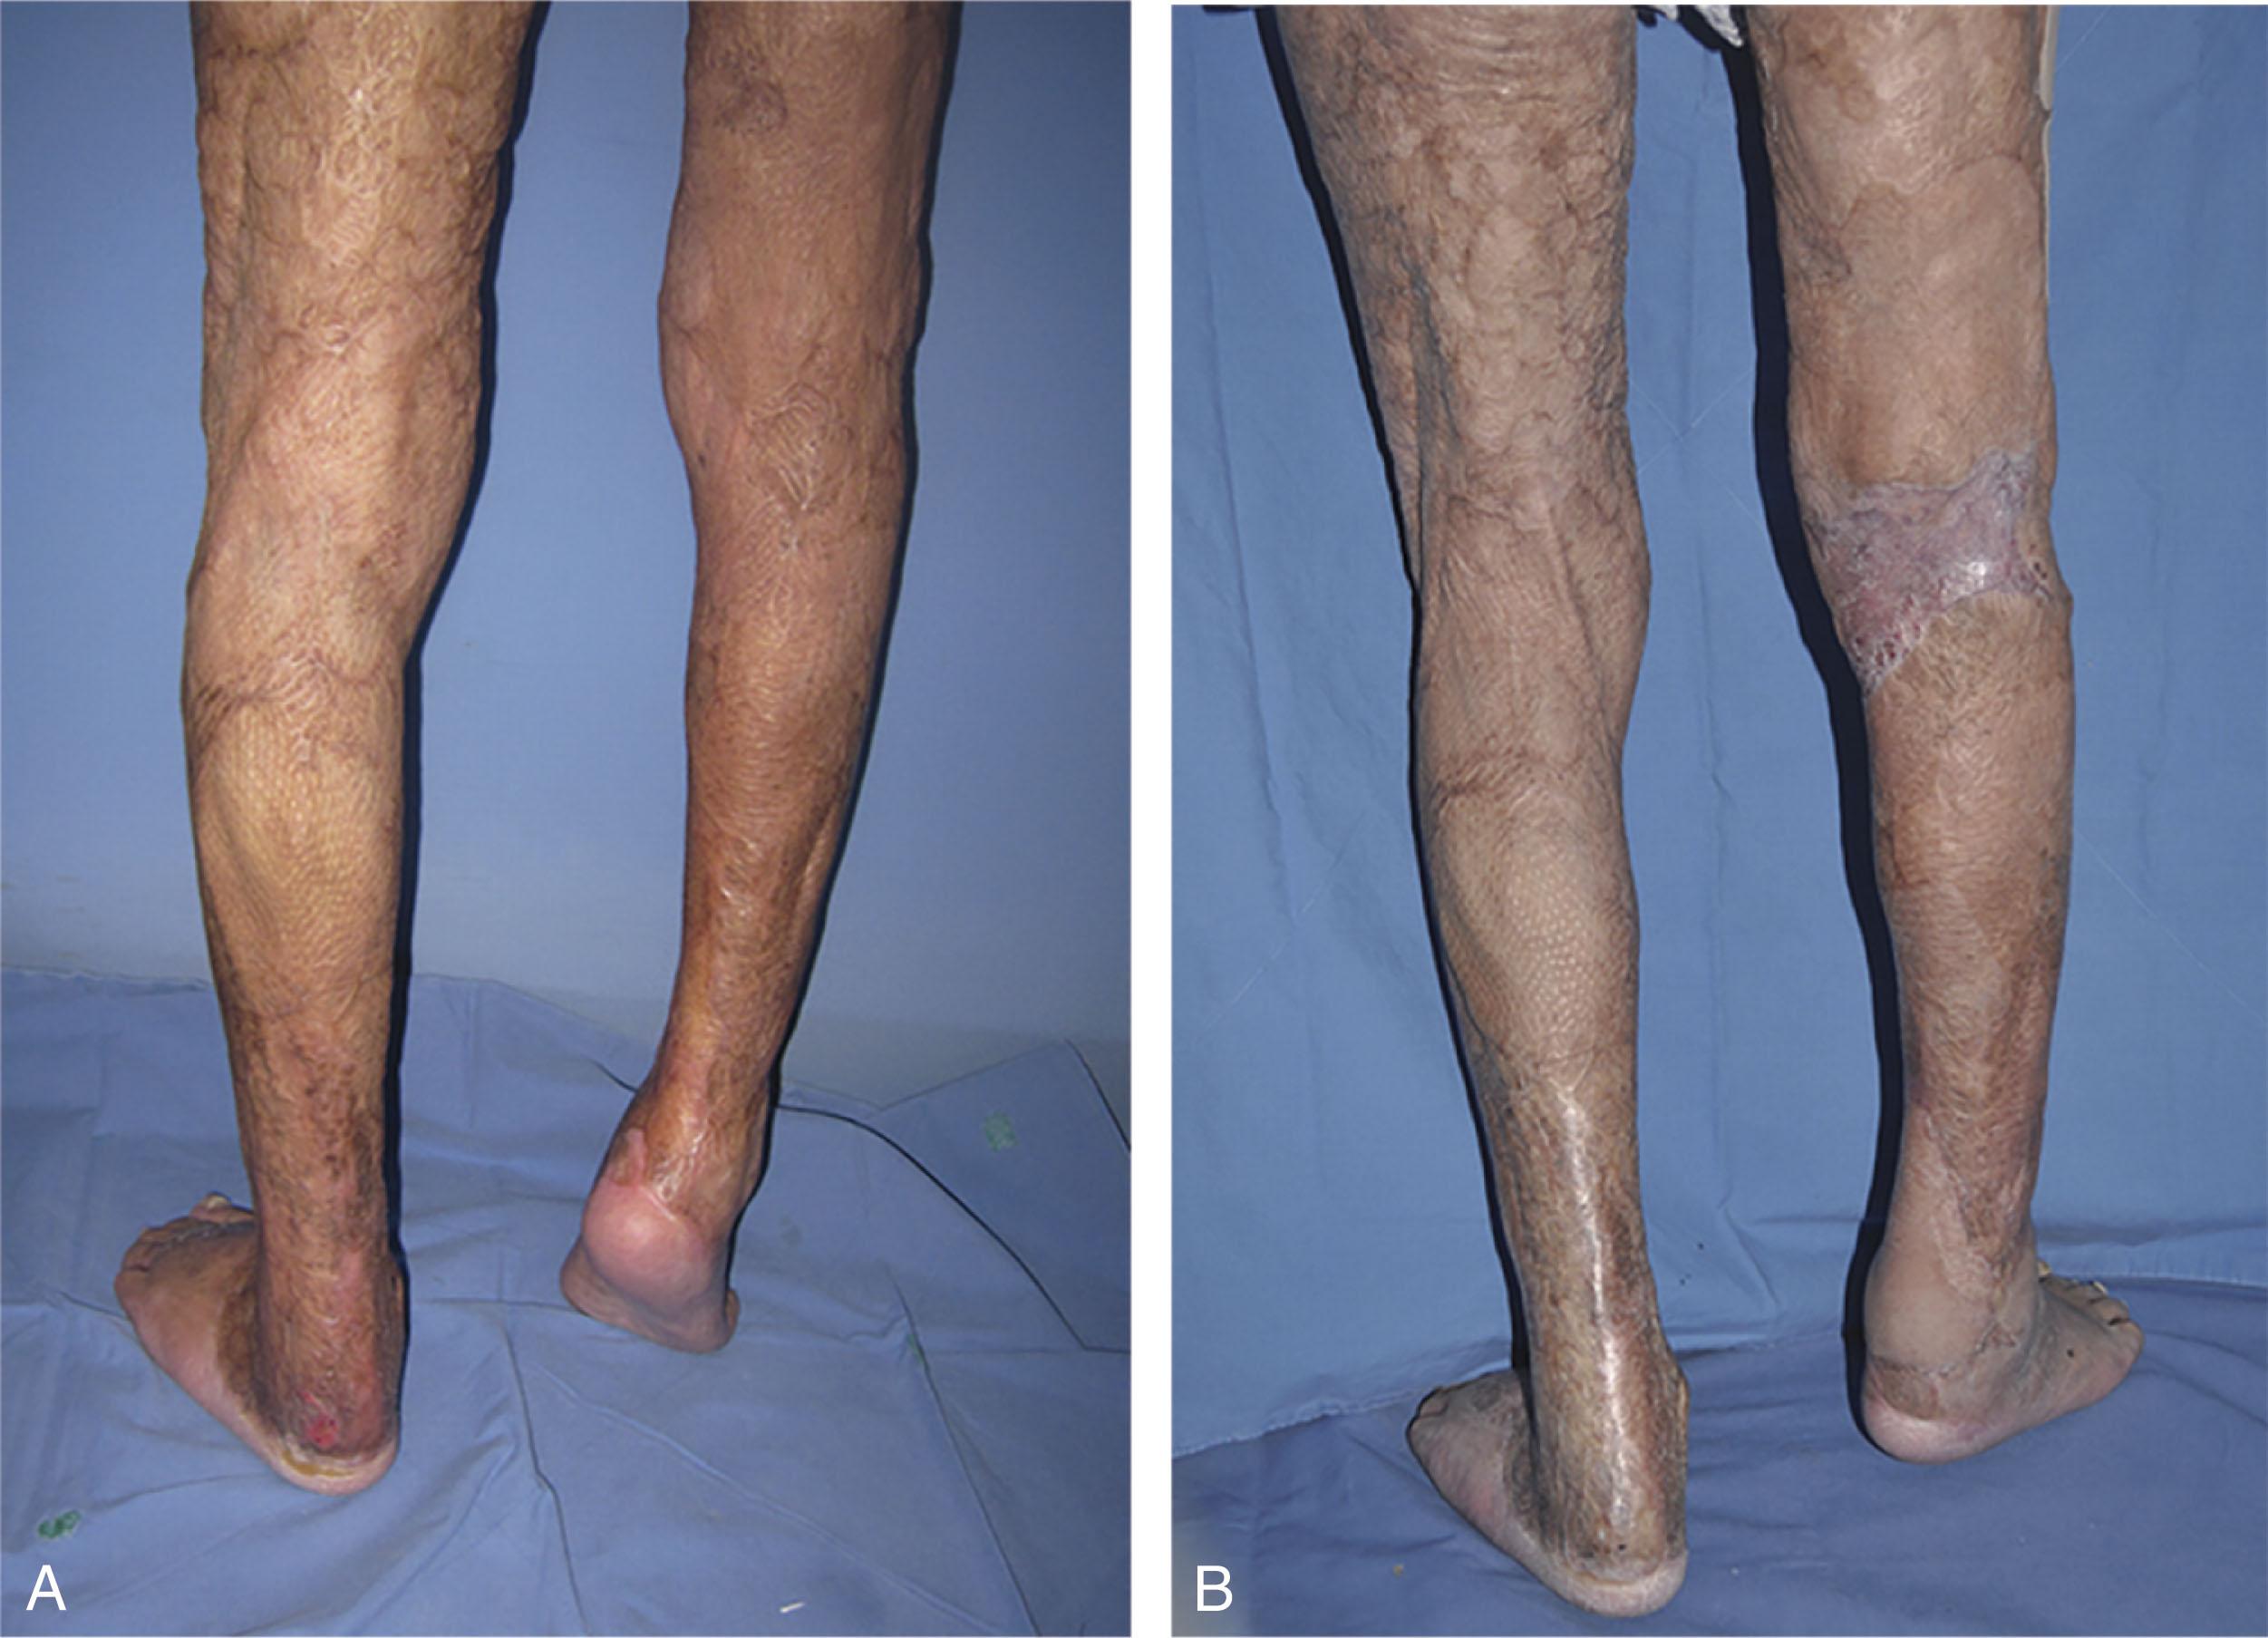 Fig. 15-8, A , Preoperative and B , 6-month postoperative images of a 37-year-old male with an equinus contracture after burn injury of the right lower extremity that underwent scar excision, Achilles tendon release, and radial forearm free flap.